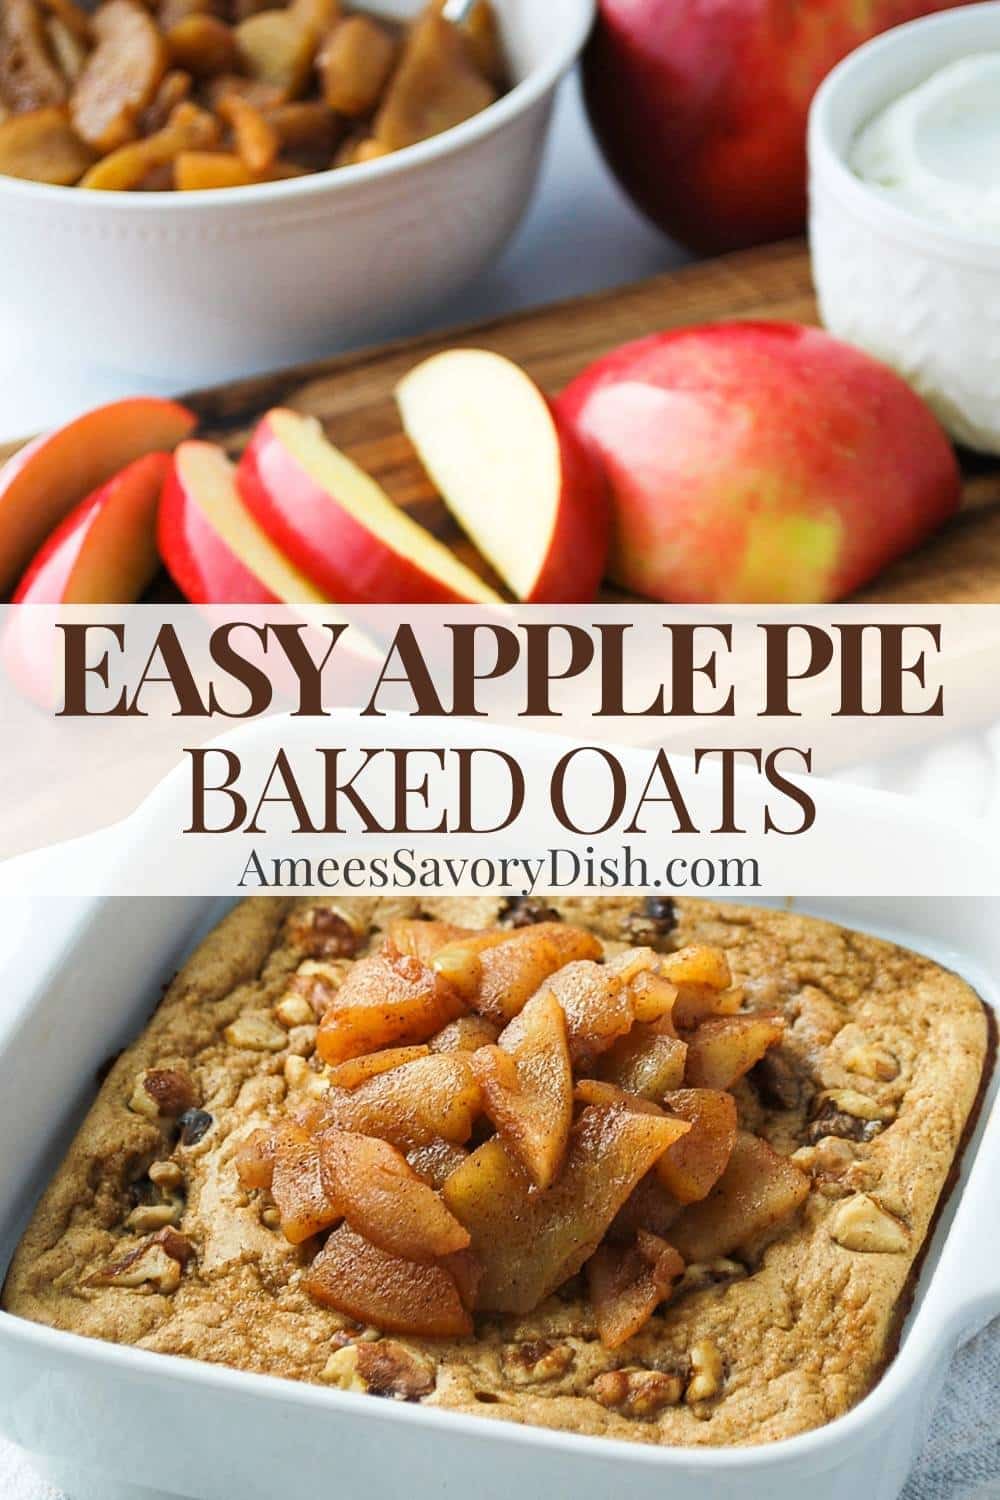 This easy Apple Pie Baked Oats recipe packs all of the sweet and spiced flavors of apple pie into healthy baked oats via @Ameessavorydish